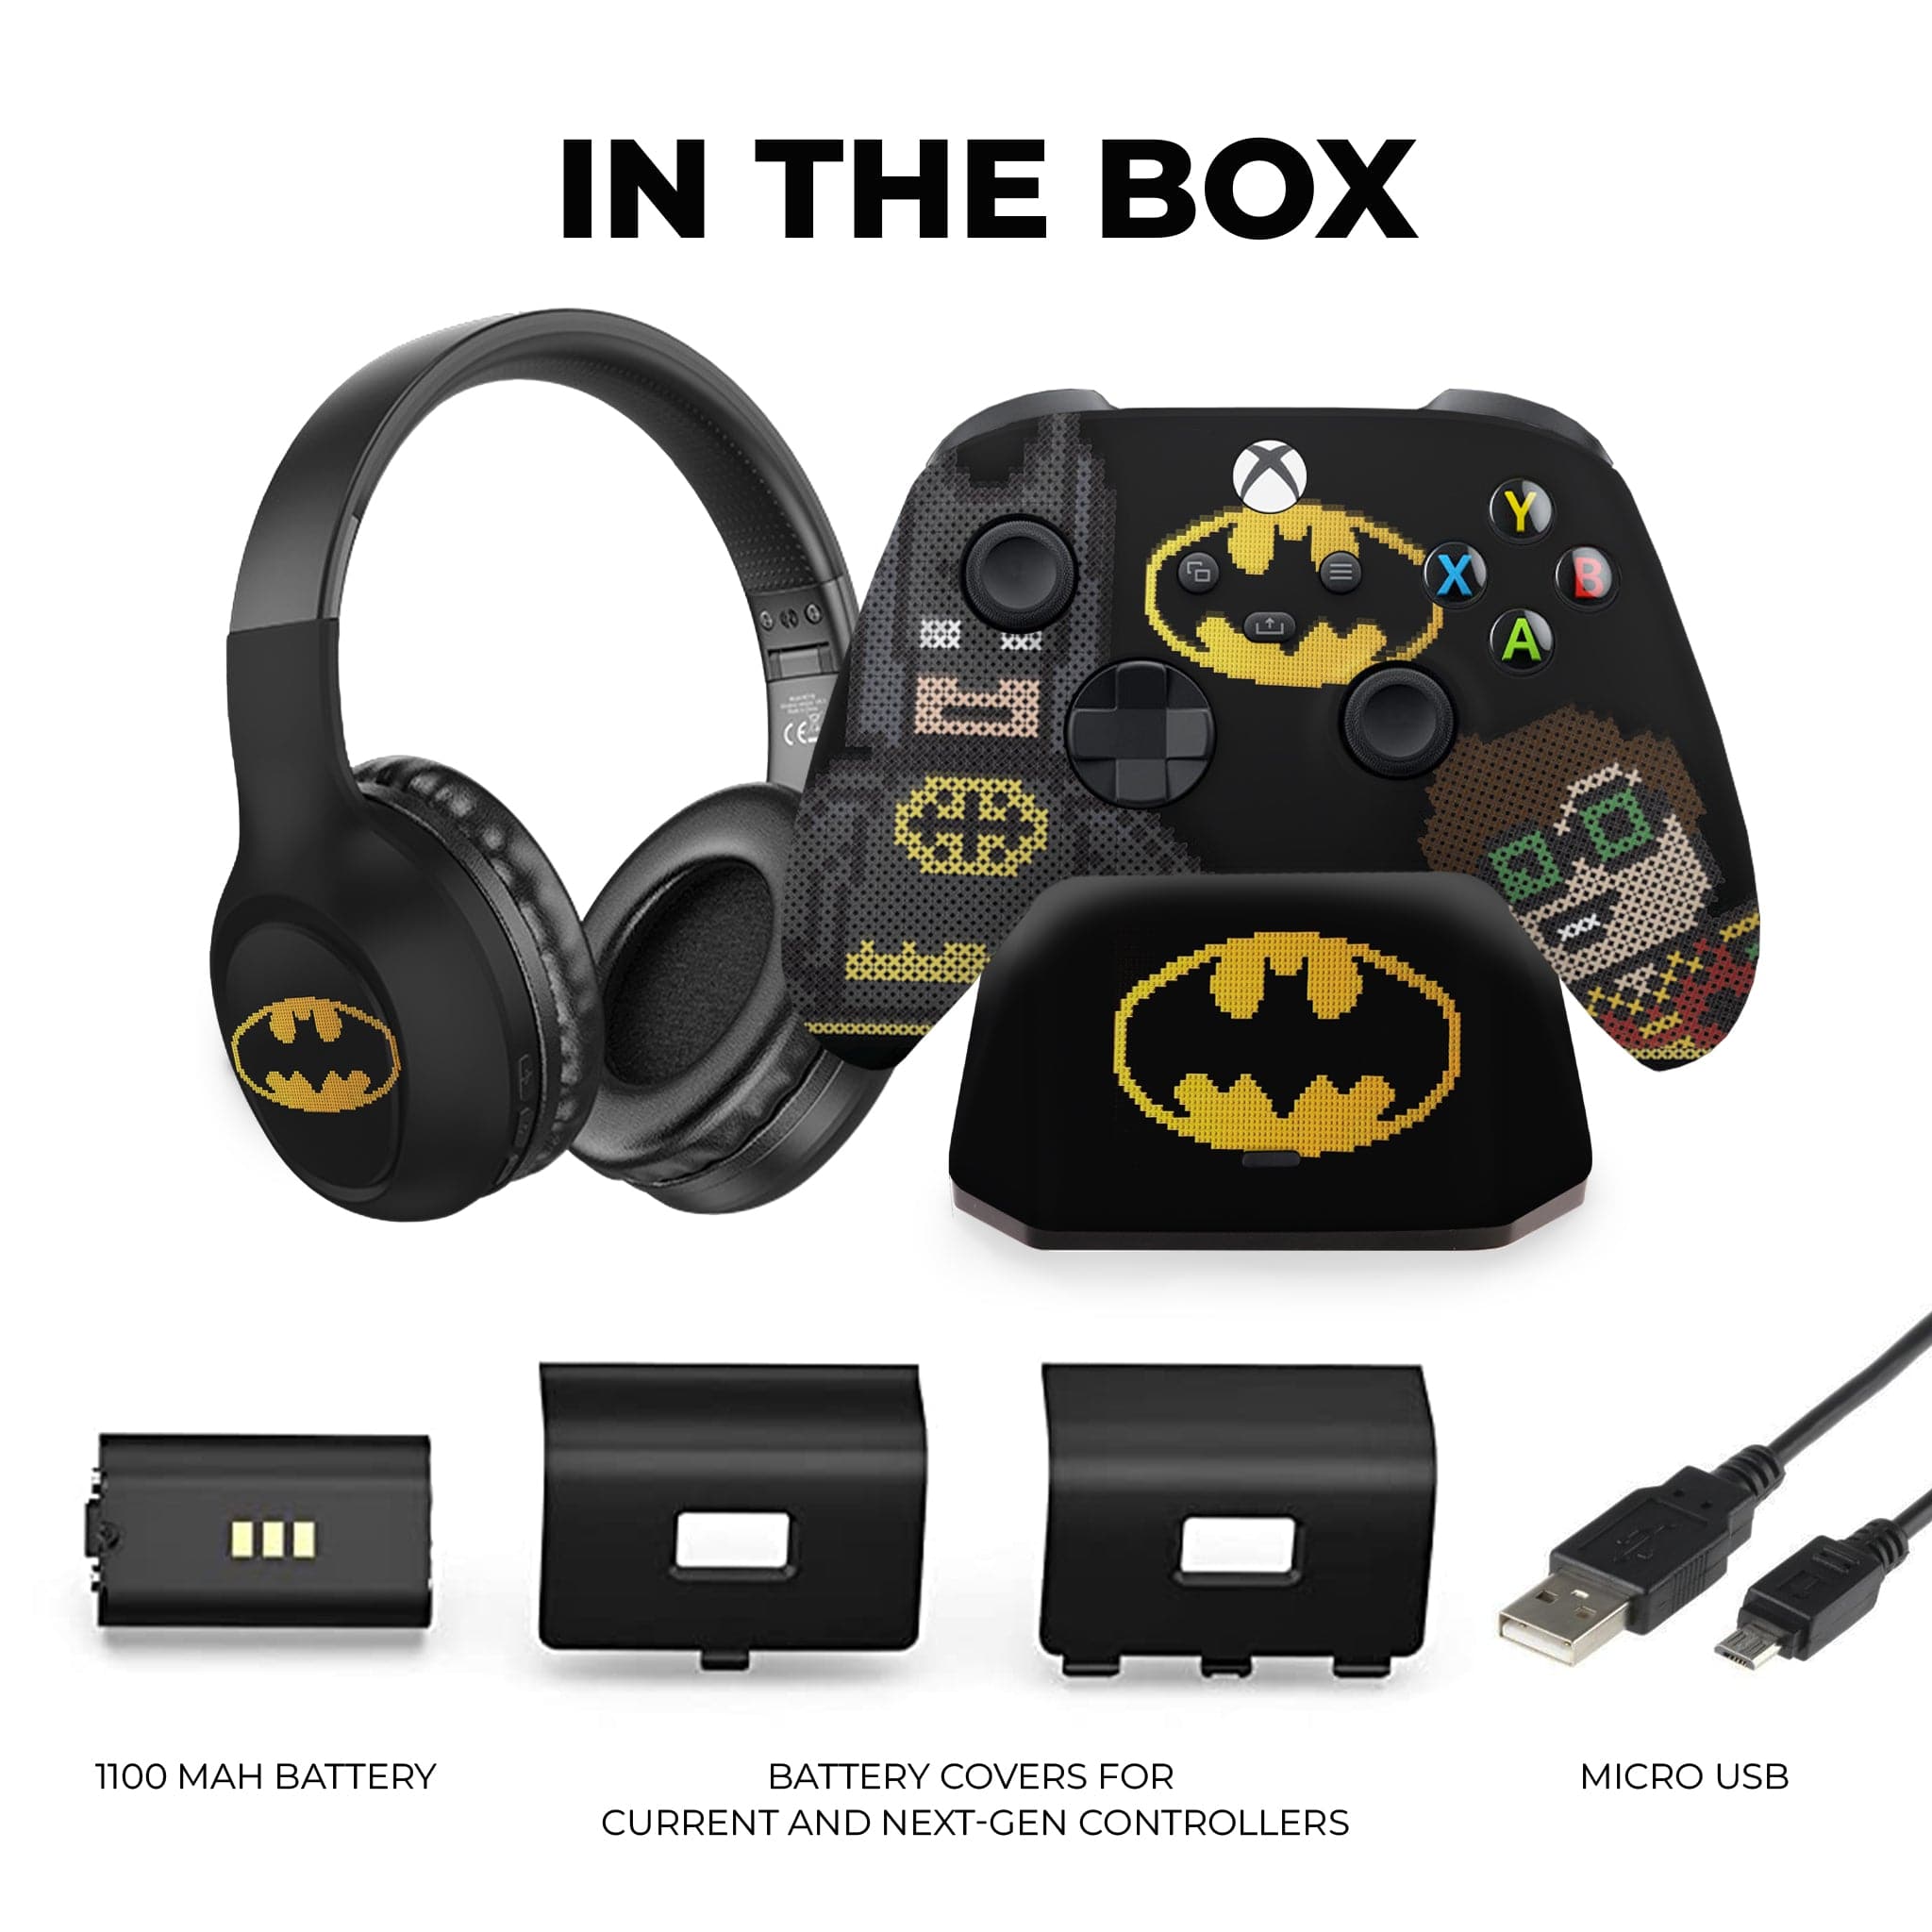 Lego Batman inspired Xbox Series X Modded Controller with Charging Station & Headphone